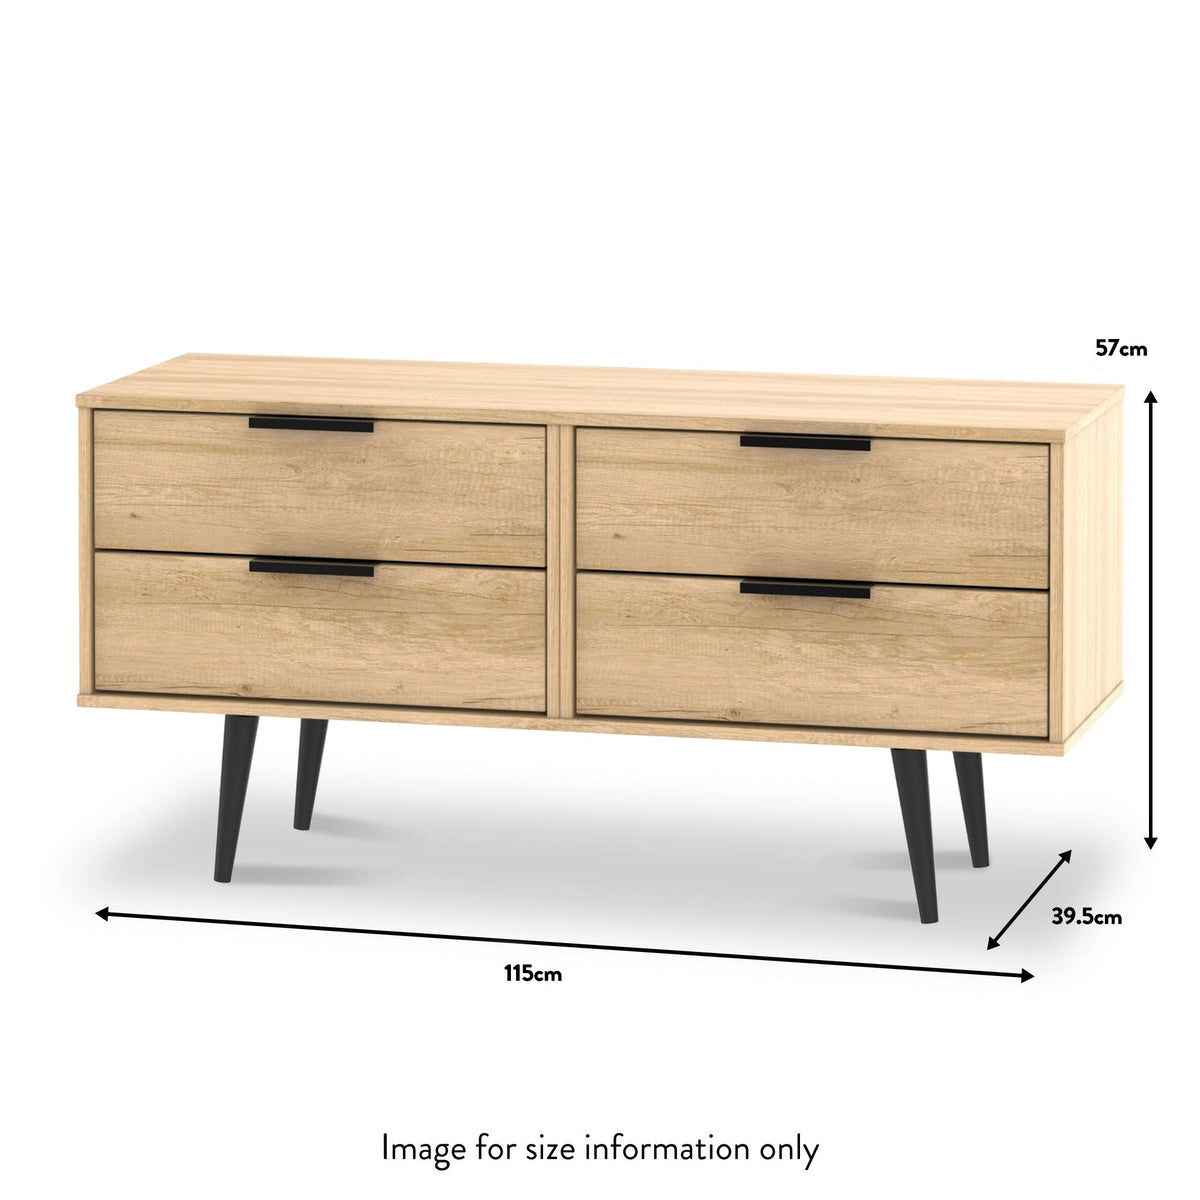 Asher Light Oak 4 Drawer Low Storage Chest with black legs dimensions